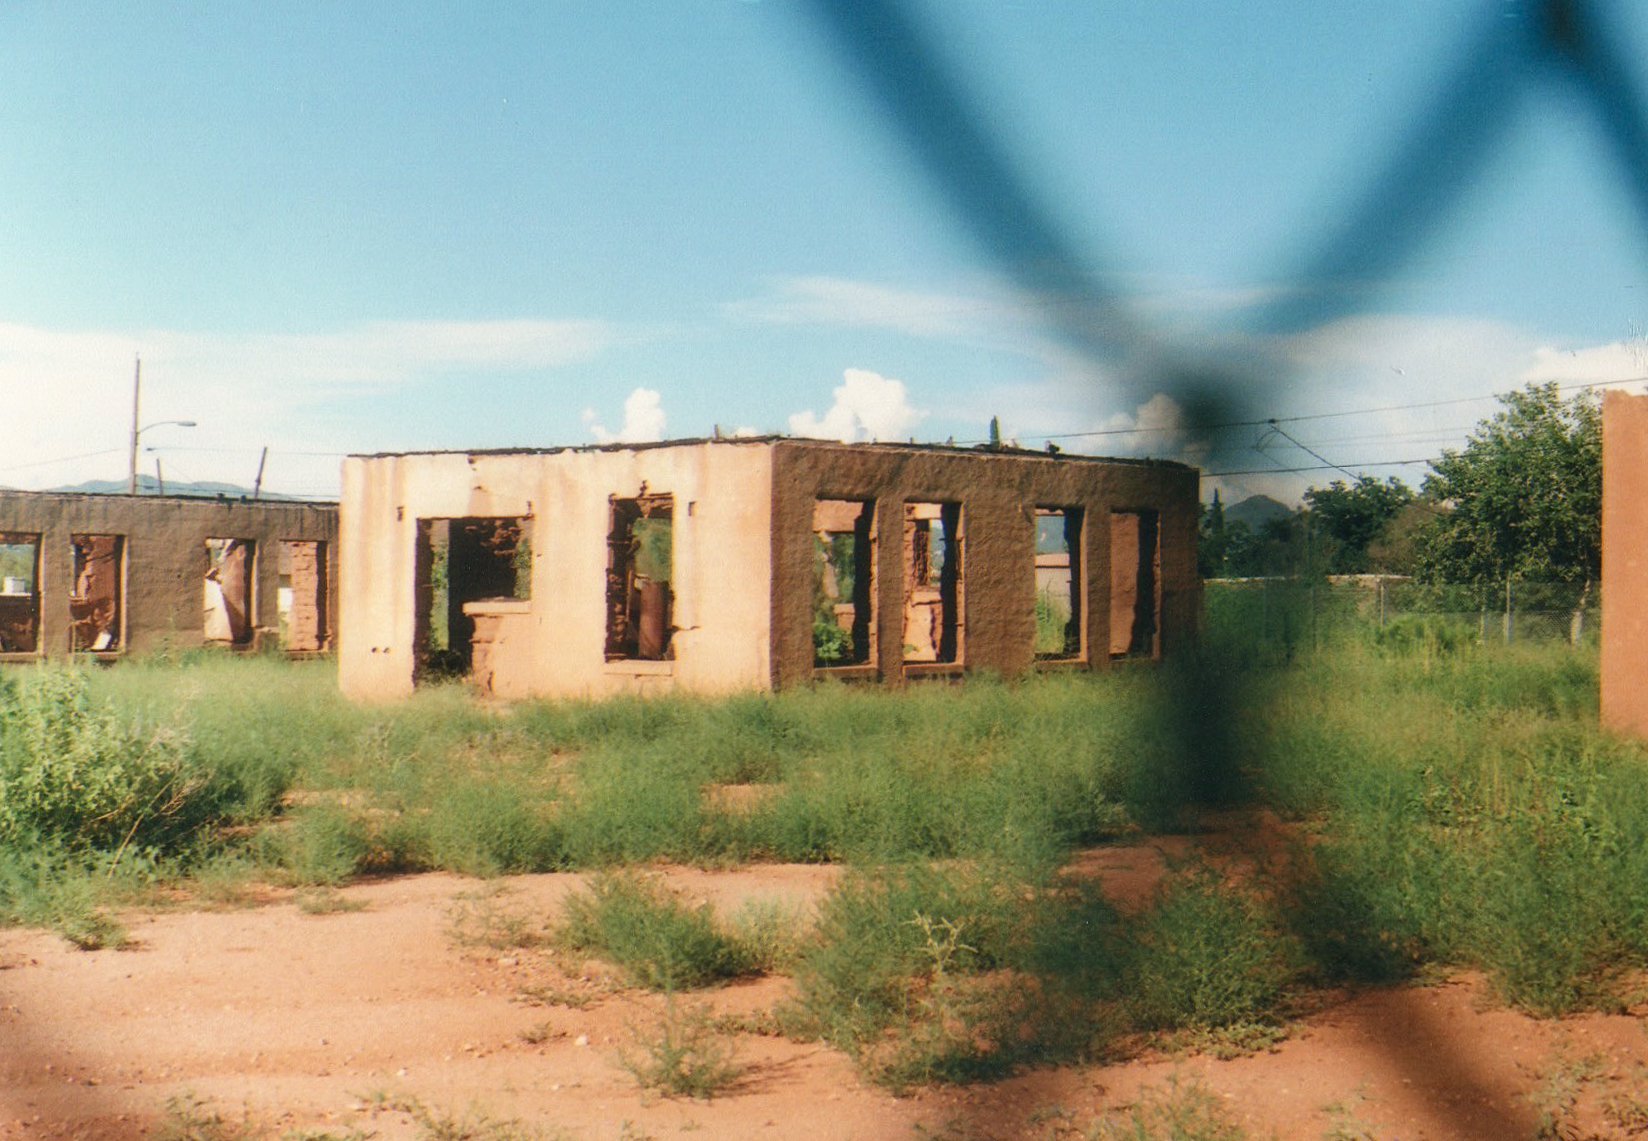 A chain-link barrier informed the author’s vantage on her first visit to Camp Naco, a former military outpost in Arizona near the border with Mexico. Photo: Lauren Napier.